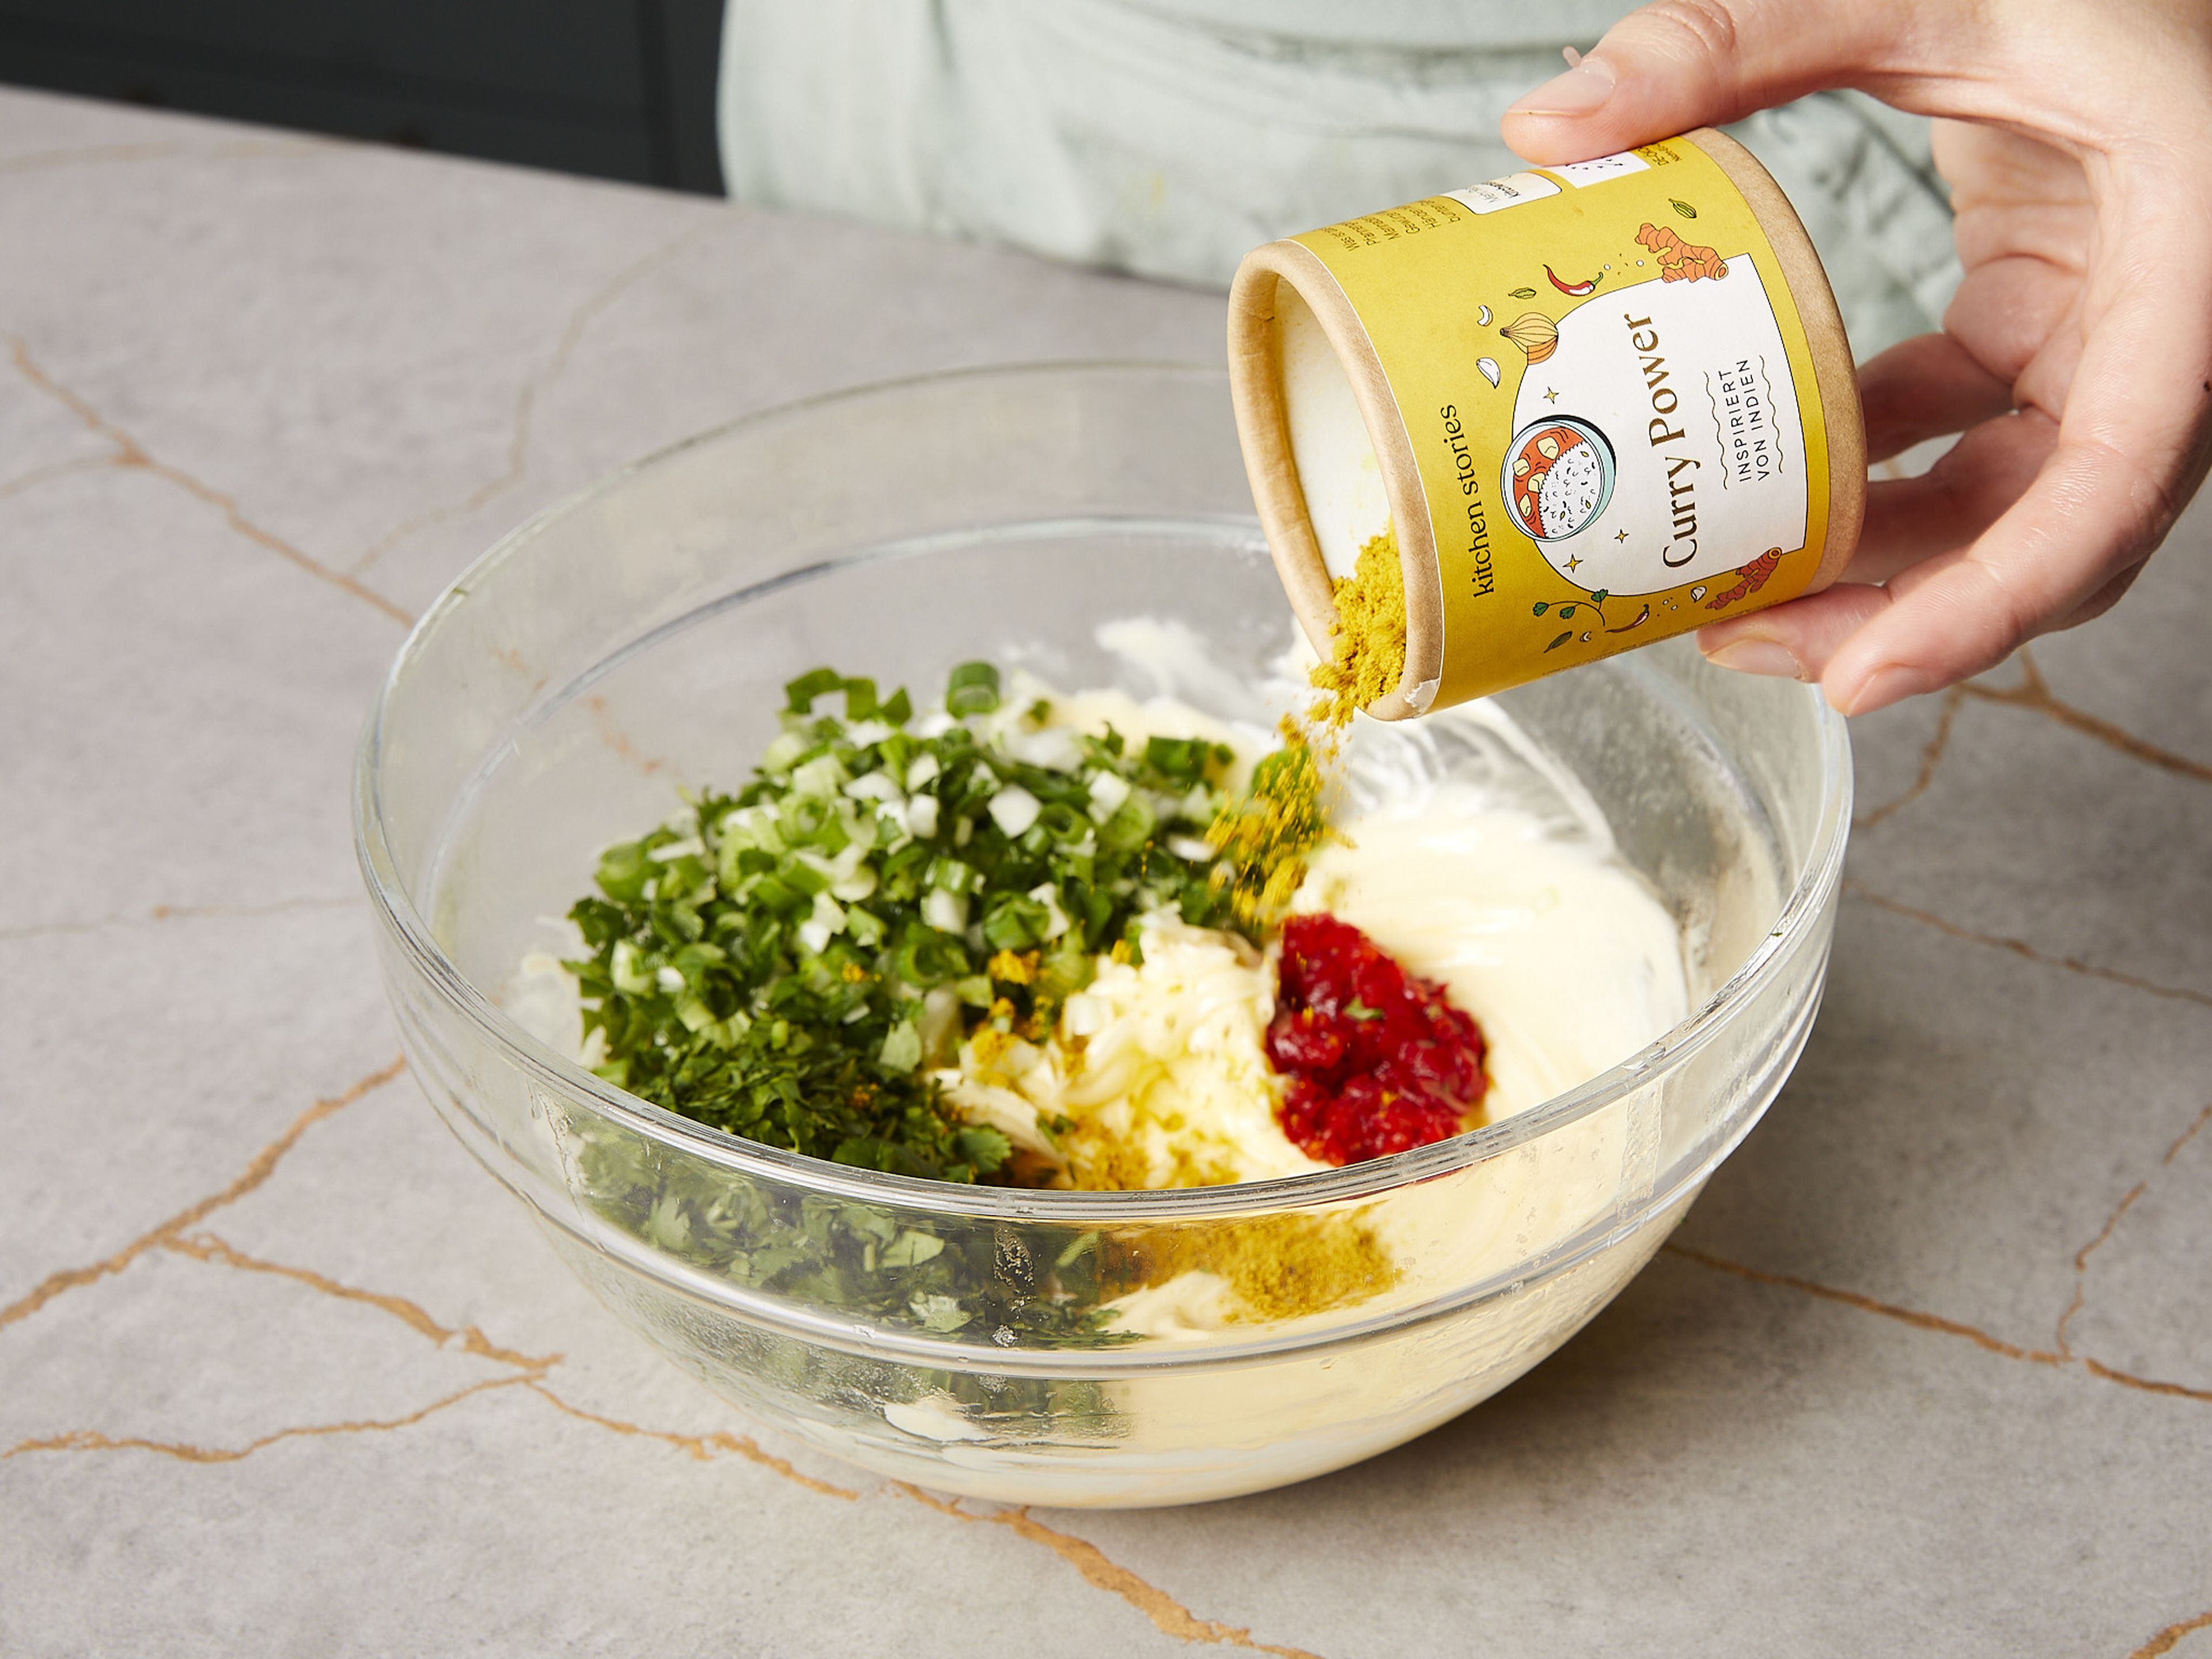 In a bowl, mix soft butter with scallion, coriander, chili and our CURRY POWER seasoning. Season with salt to taste and roll in plastic wrap, store in the refrigerator until ready to serve. Serve with bread, grilled meat or corn.